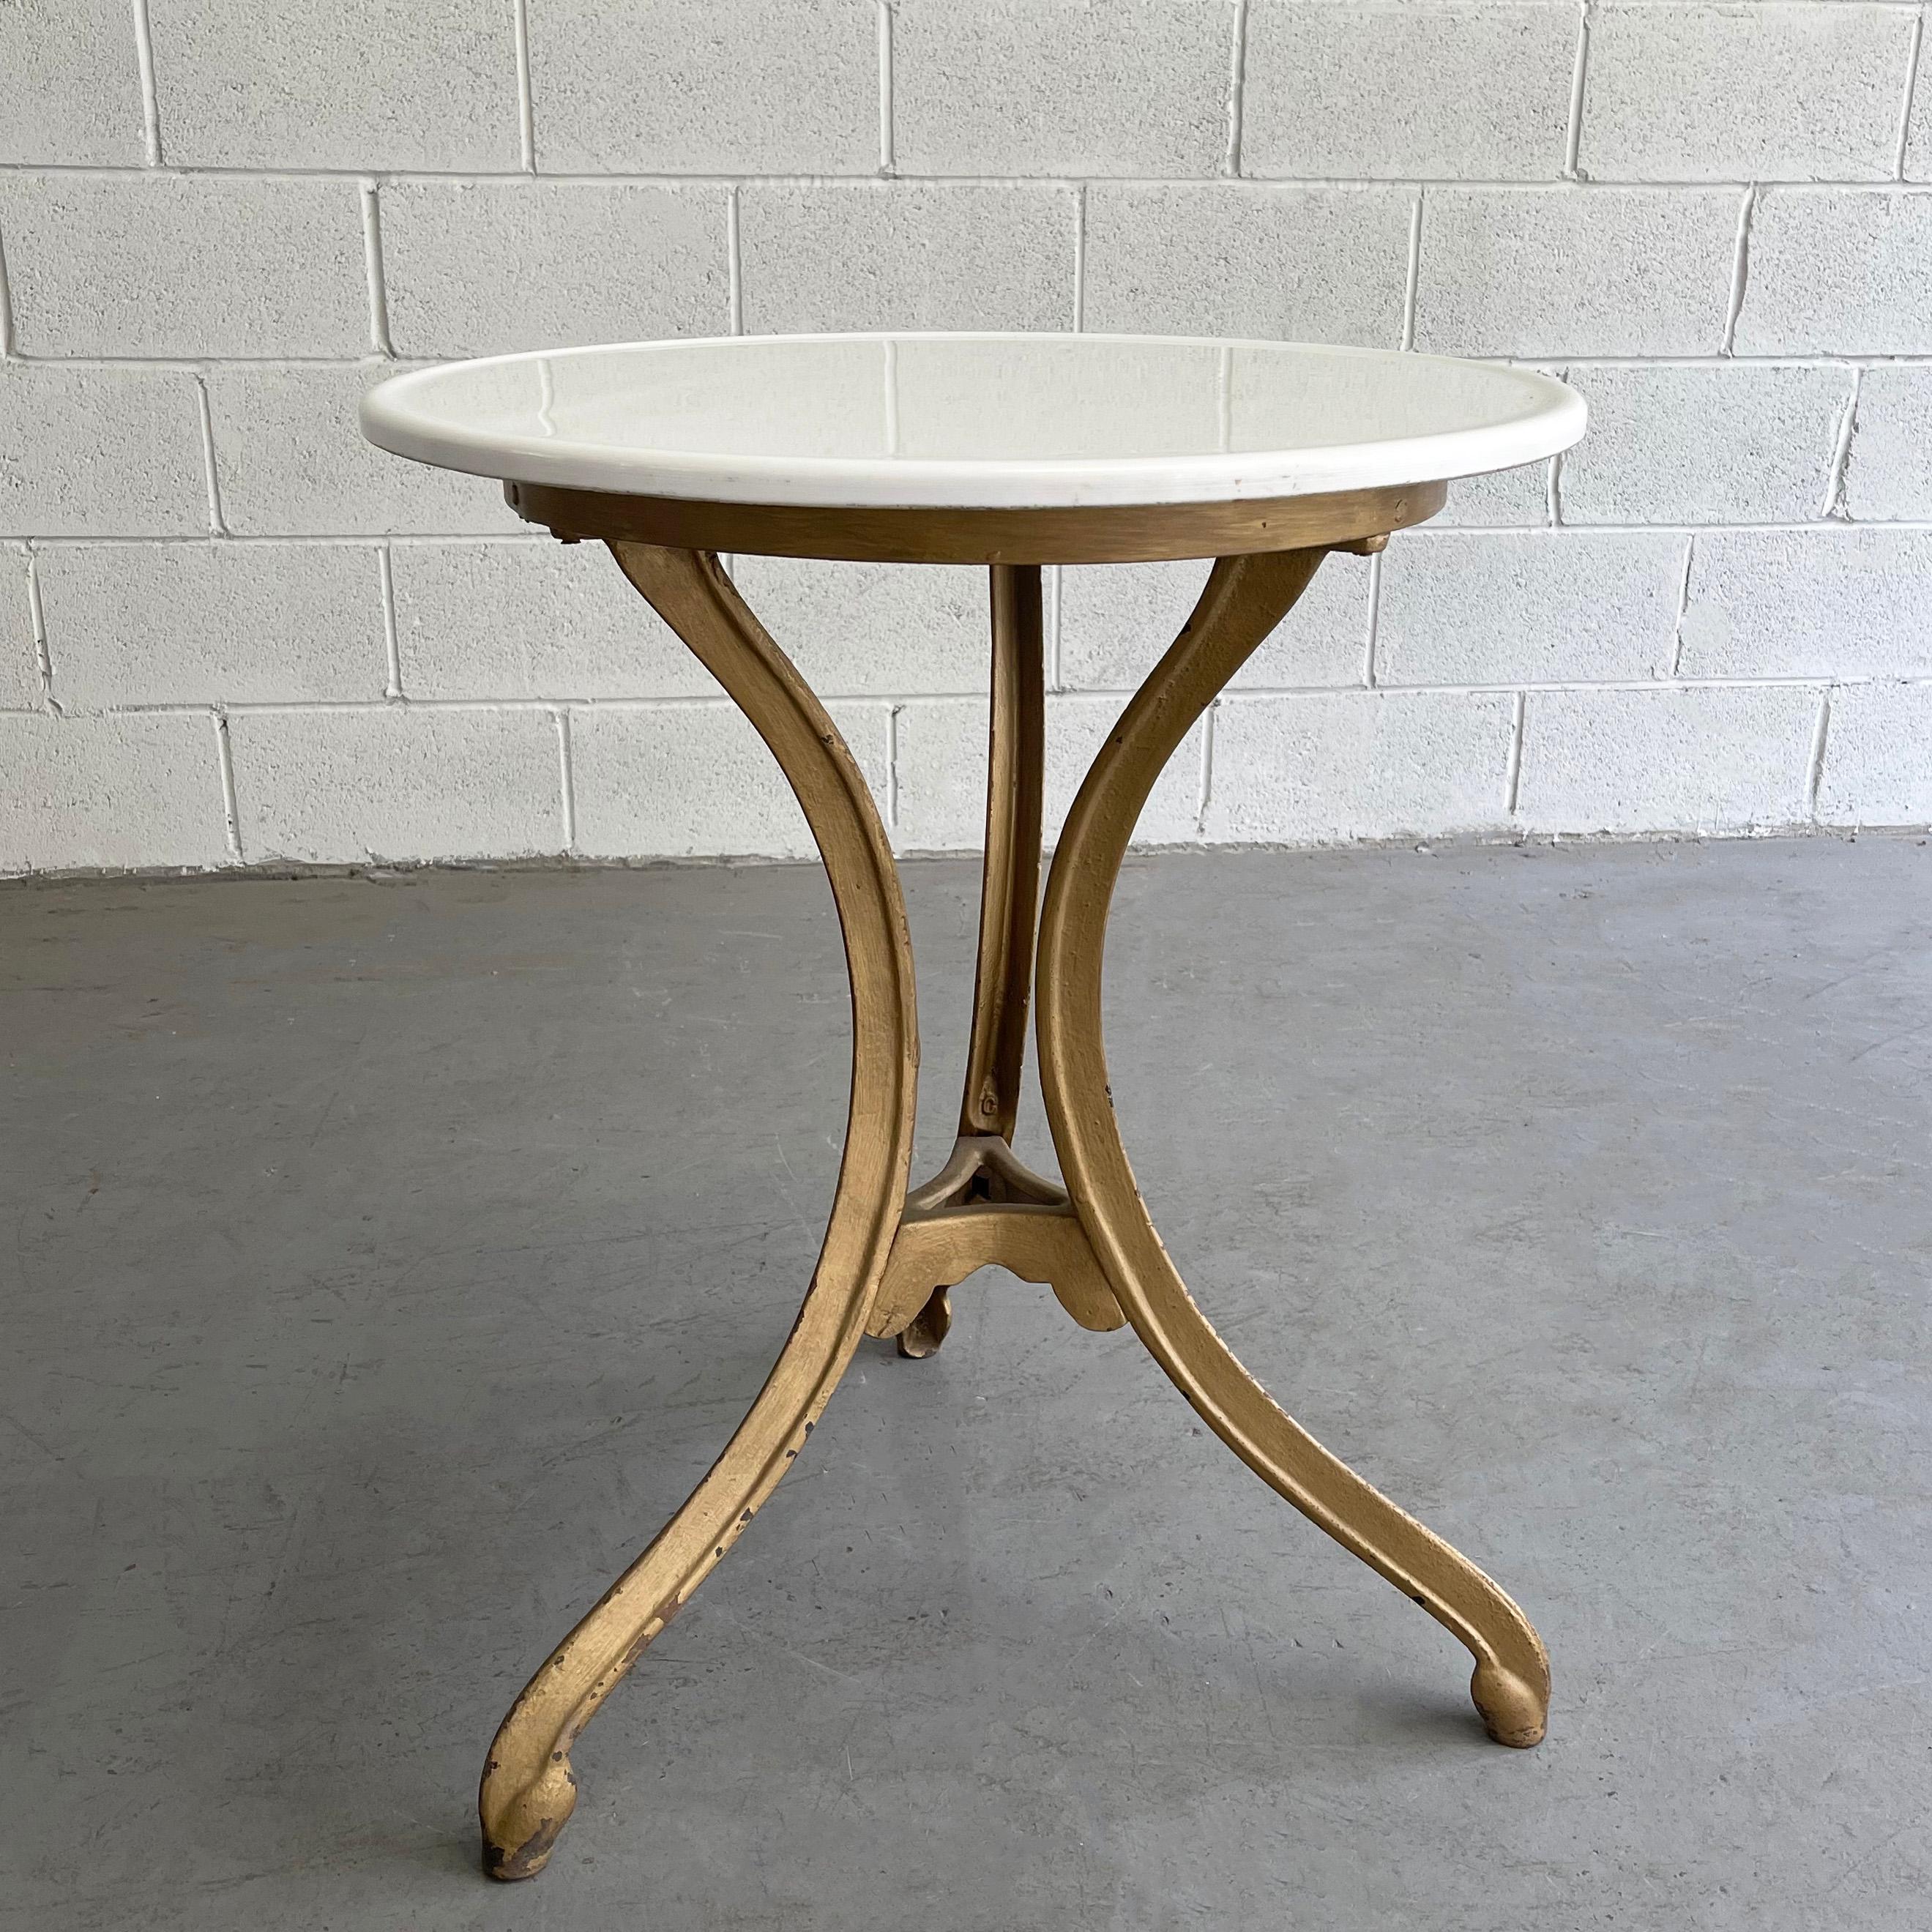 Painted Early 20th Century Round Vitrolite Glass Café Table